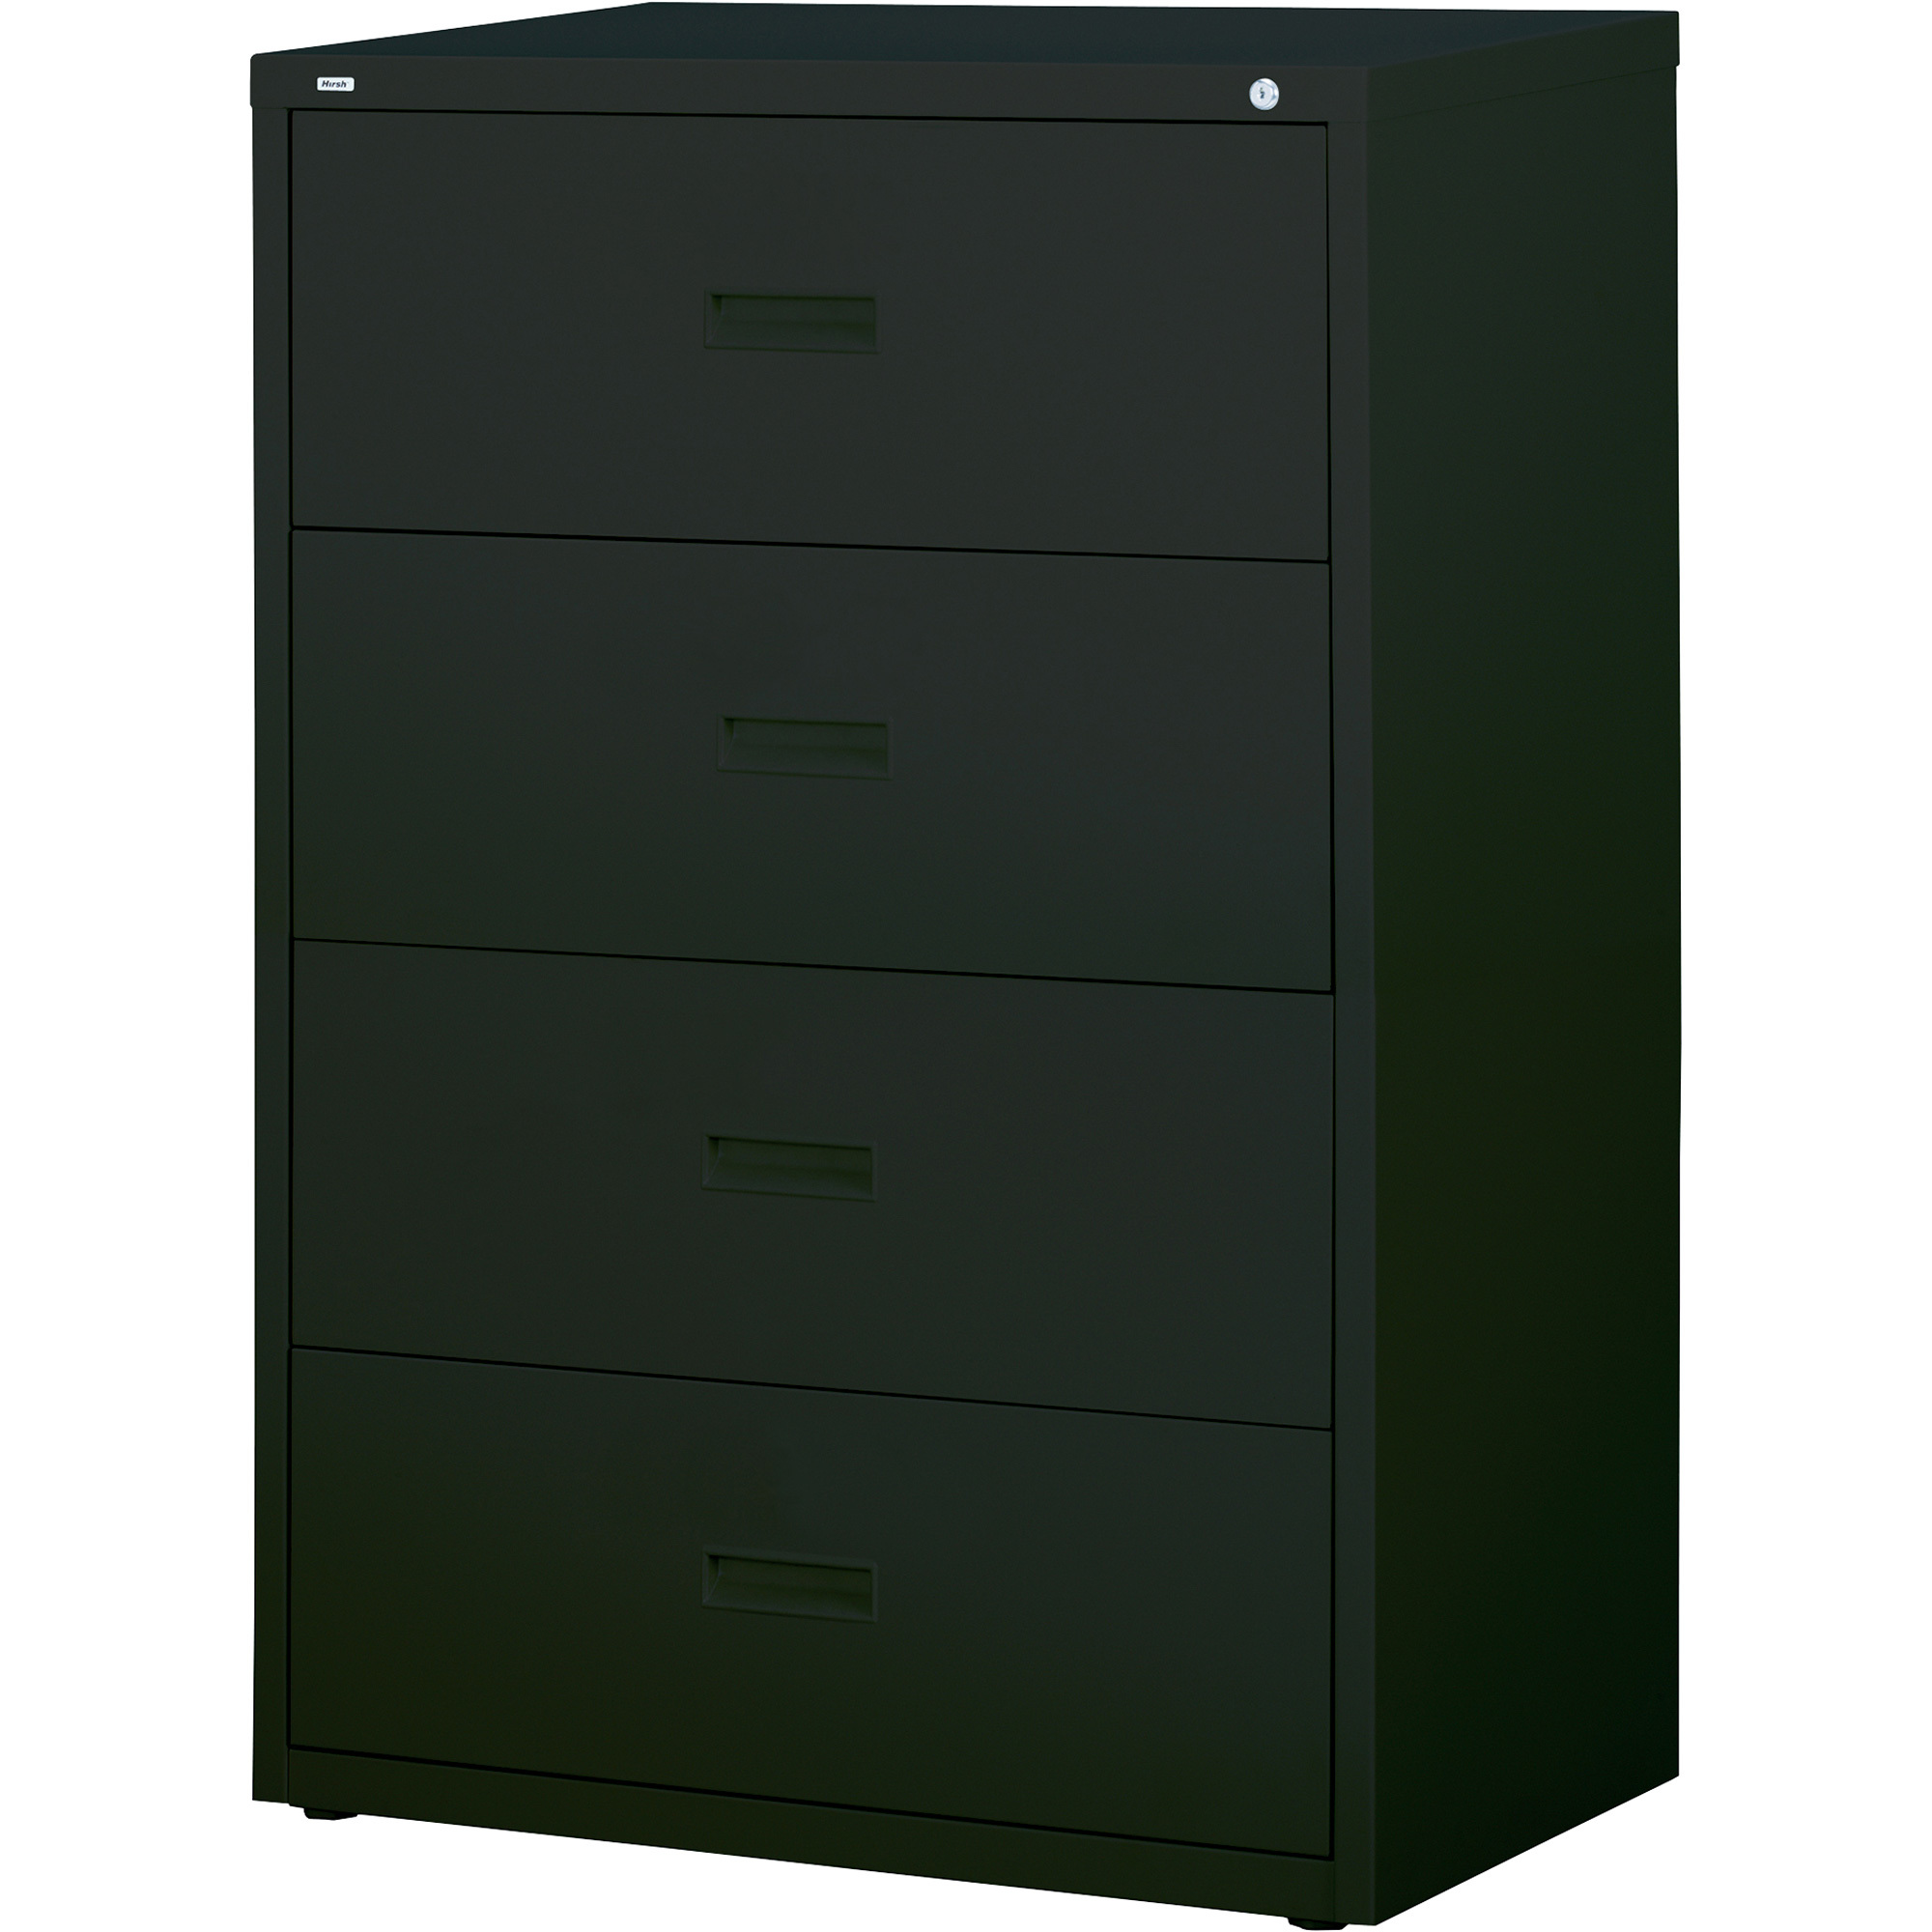 4-Drawer Cabinet for Letter-, Legal- and A-4 Hanging Files — Black, 30Inch W x 18 5/8Inch D x 52 1/2Inch H, Model - Hirsh Industries 14957